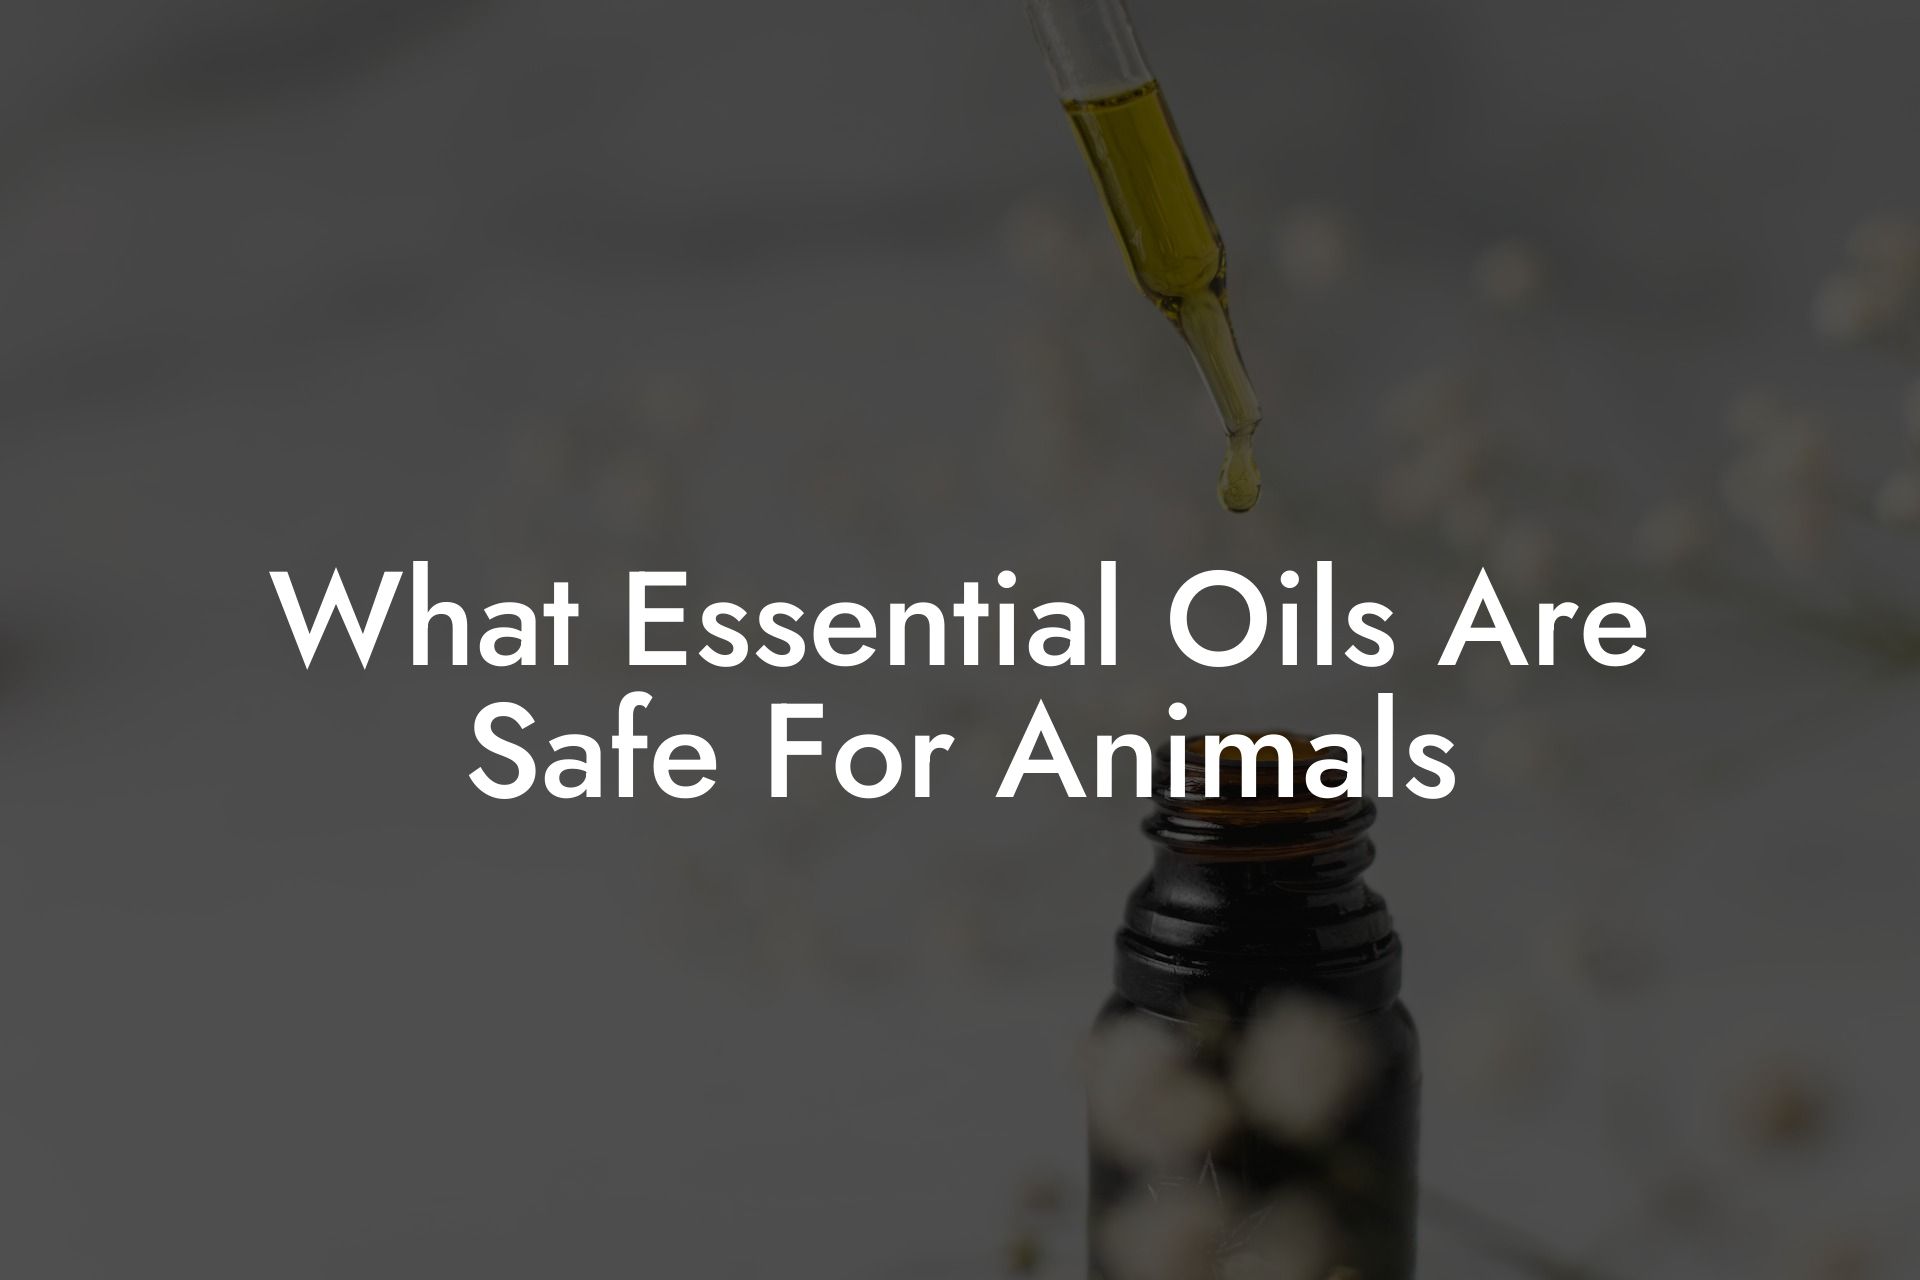 What Essential Oils Are Safe For Animals